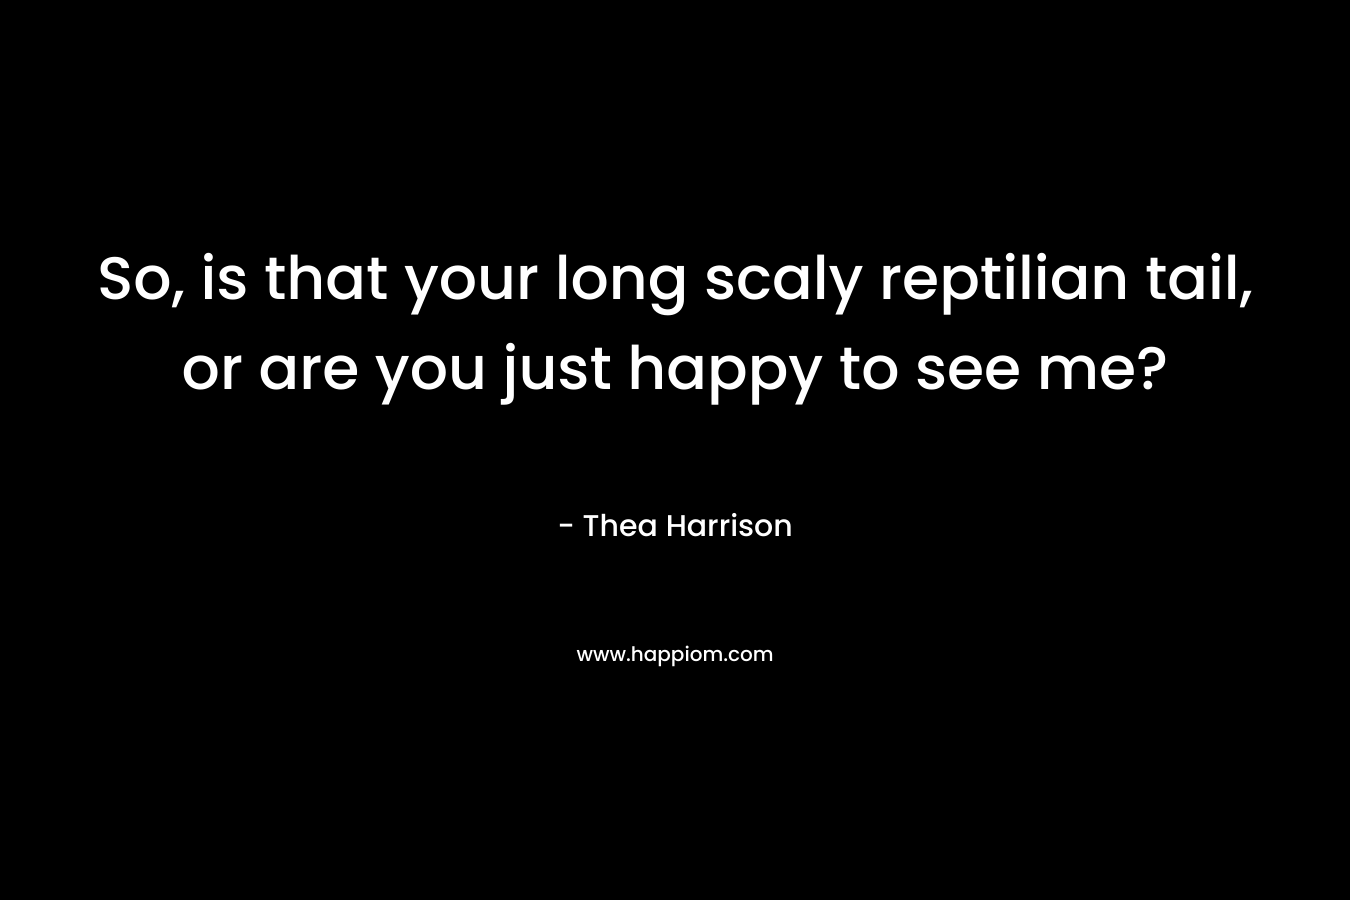 So, is that your long scaly reptilian tail, or are you just happy to see me? – Thea Harrison